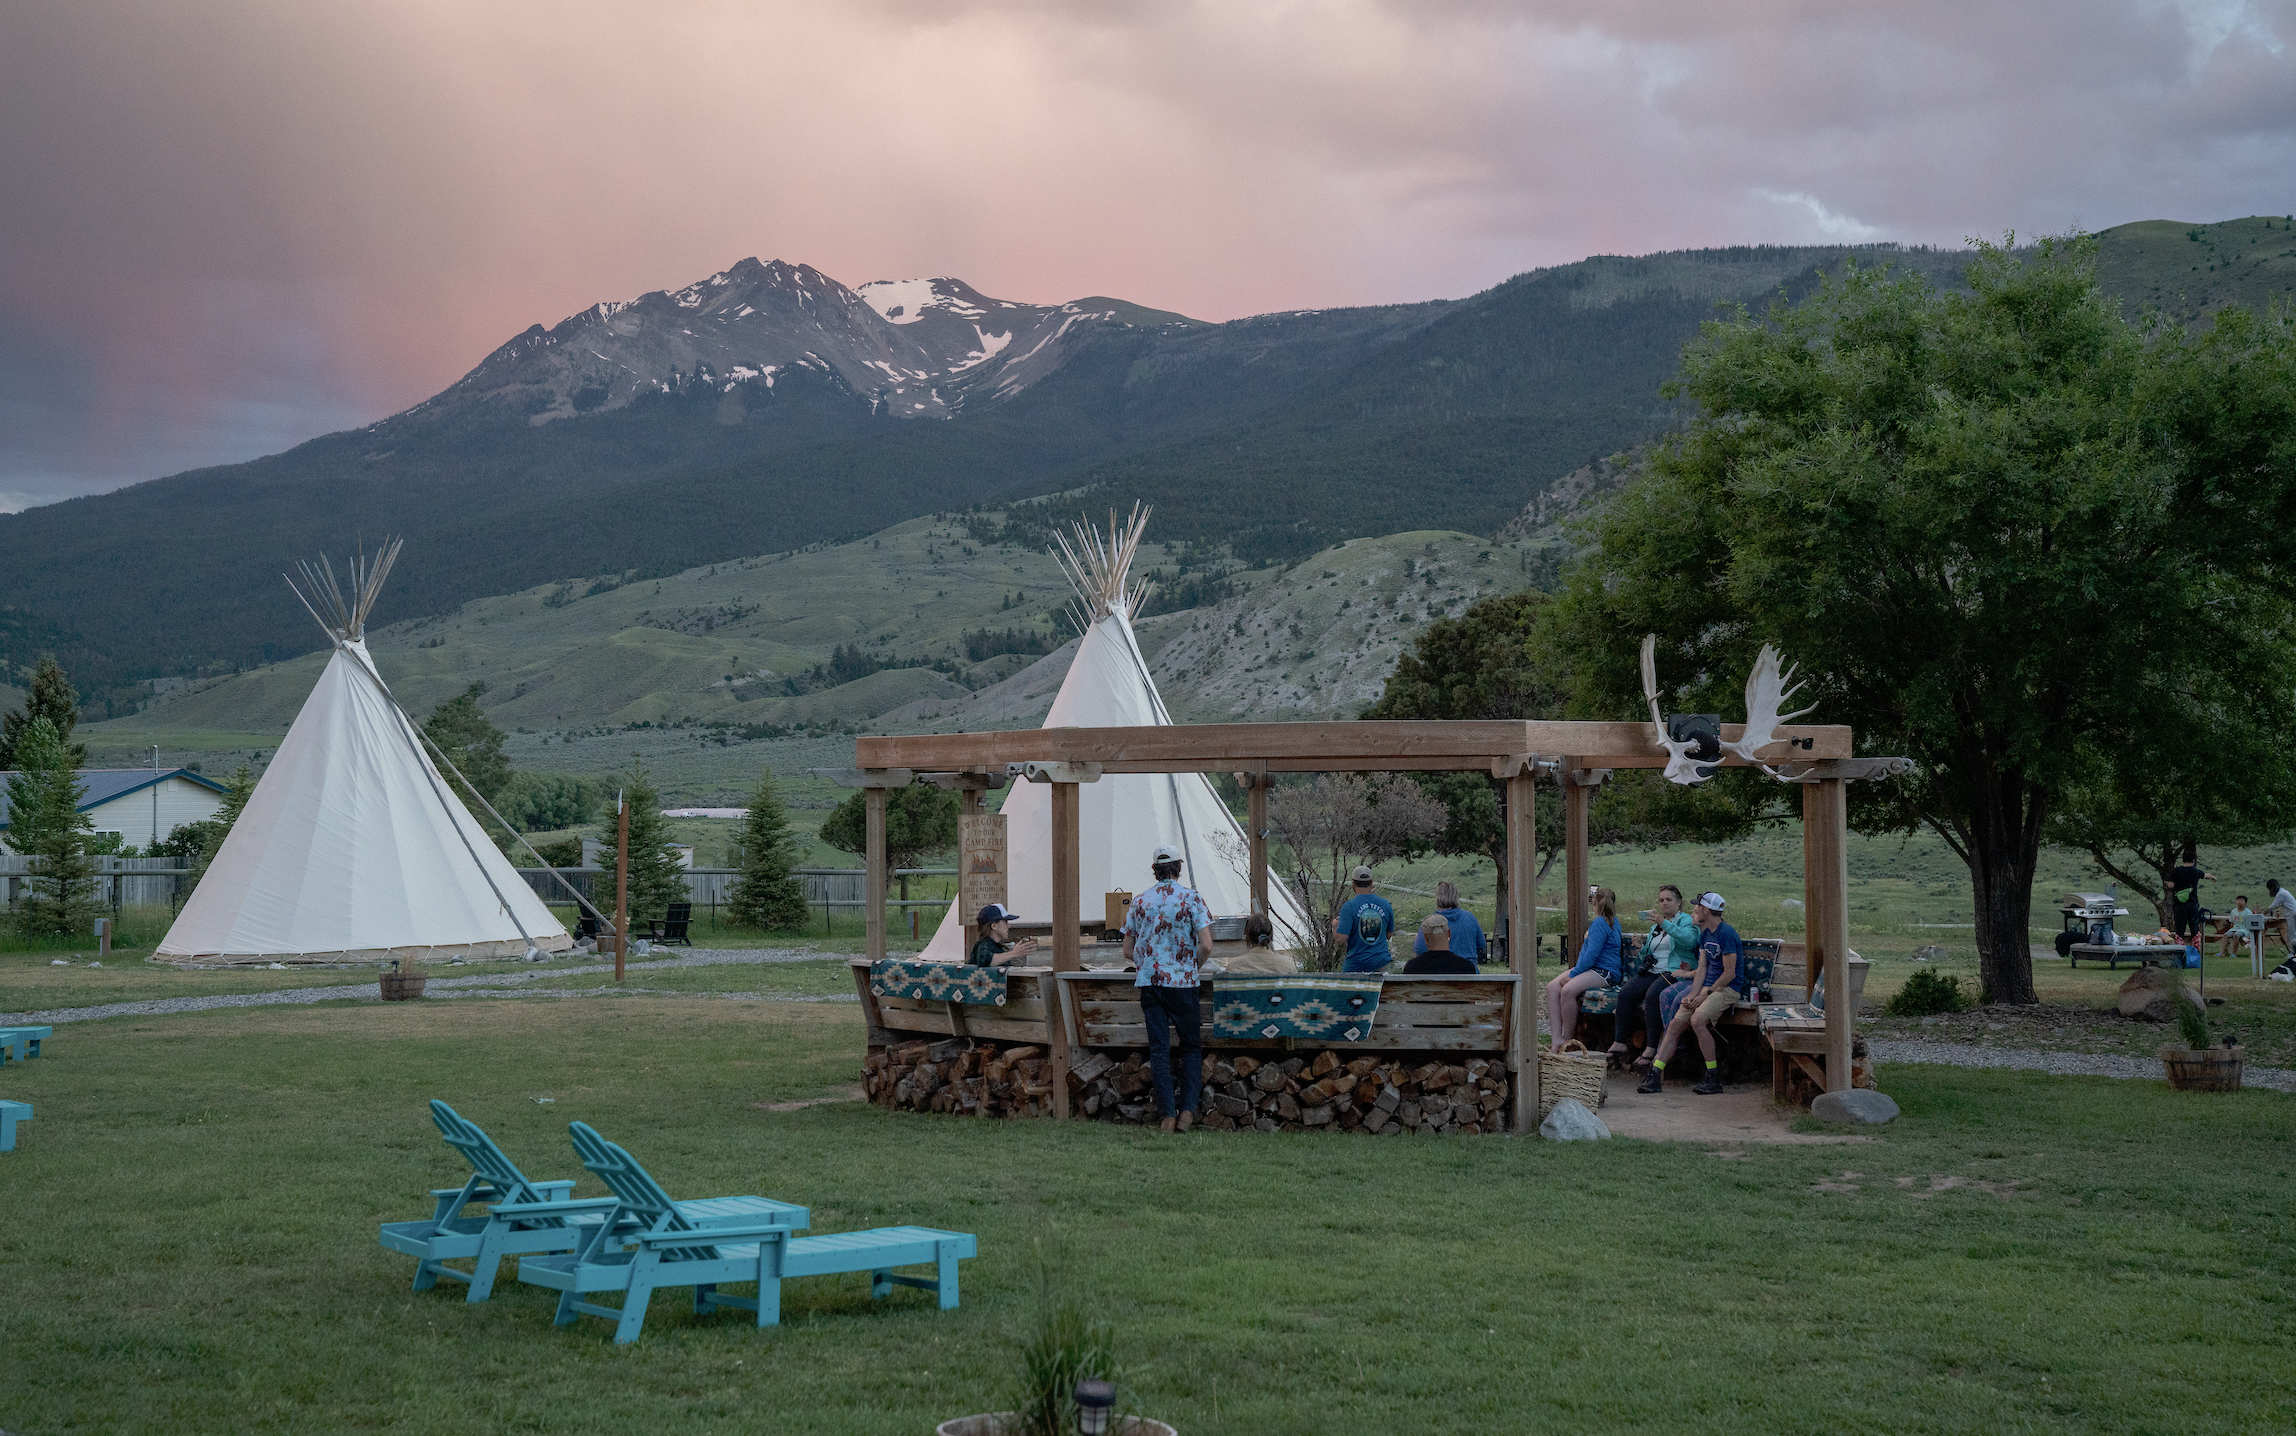 Yellowstone Lodging: Campsites, Hotels, and More - Sunset Magazine